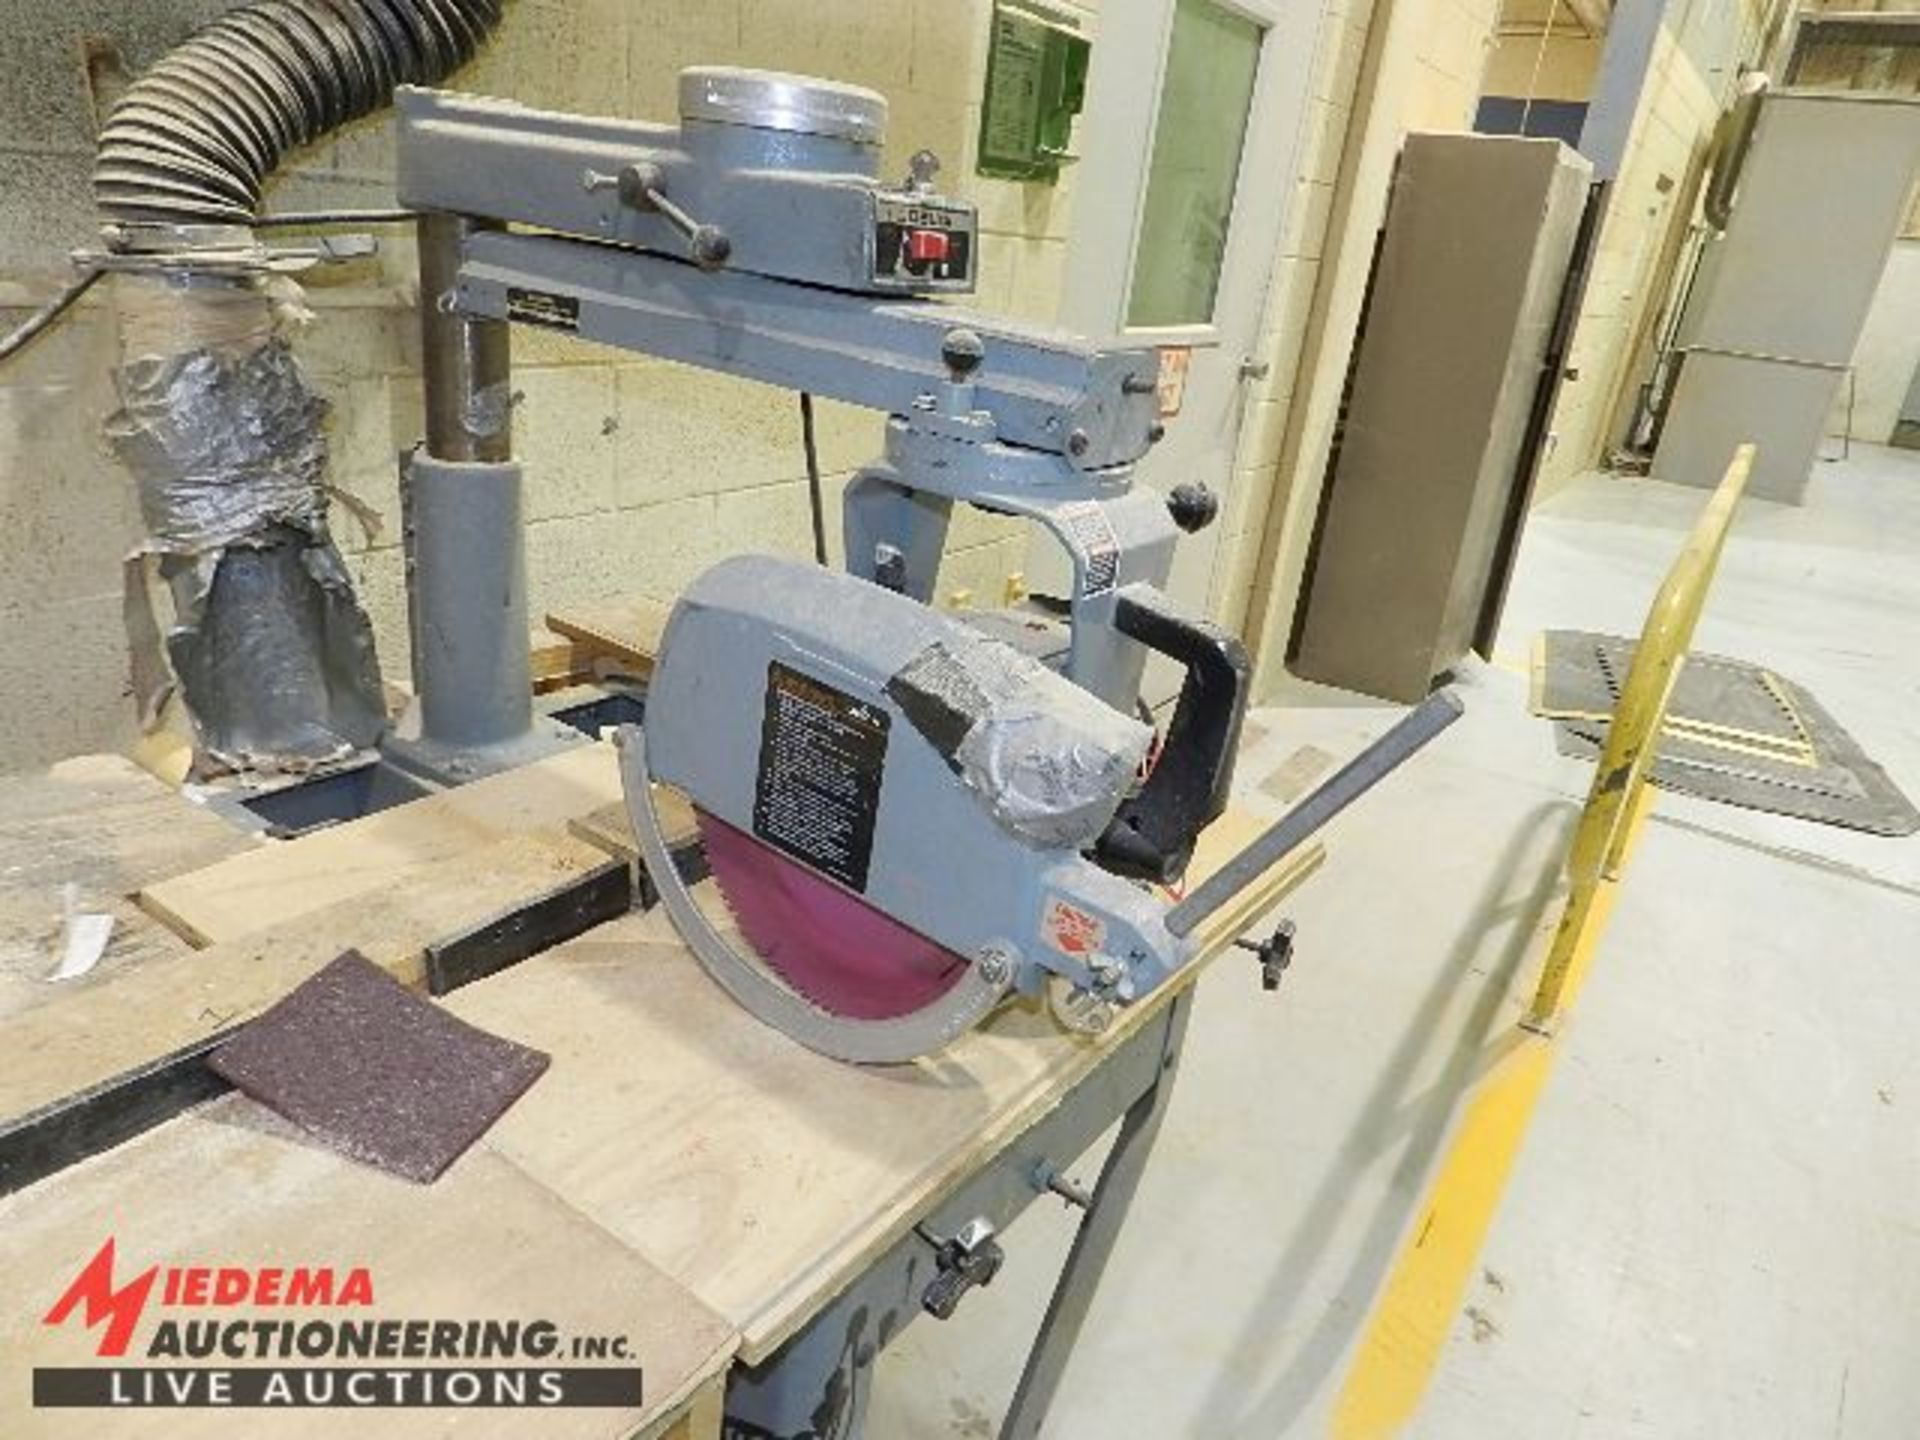 DELTA 438-02-314-2067 10" RADIAL ARM SAW, 2 HP, 230 VOLT, SINGLE PHASE, INCLUDES STAND AND WOOD - Image 2 of 4